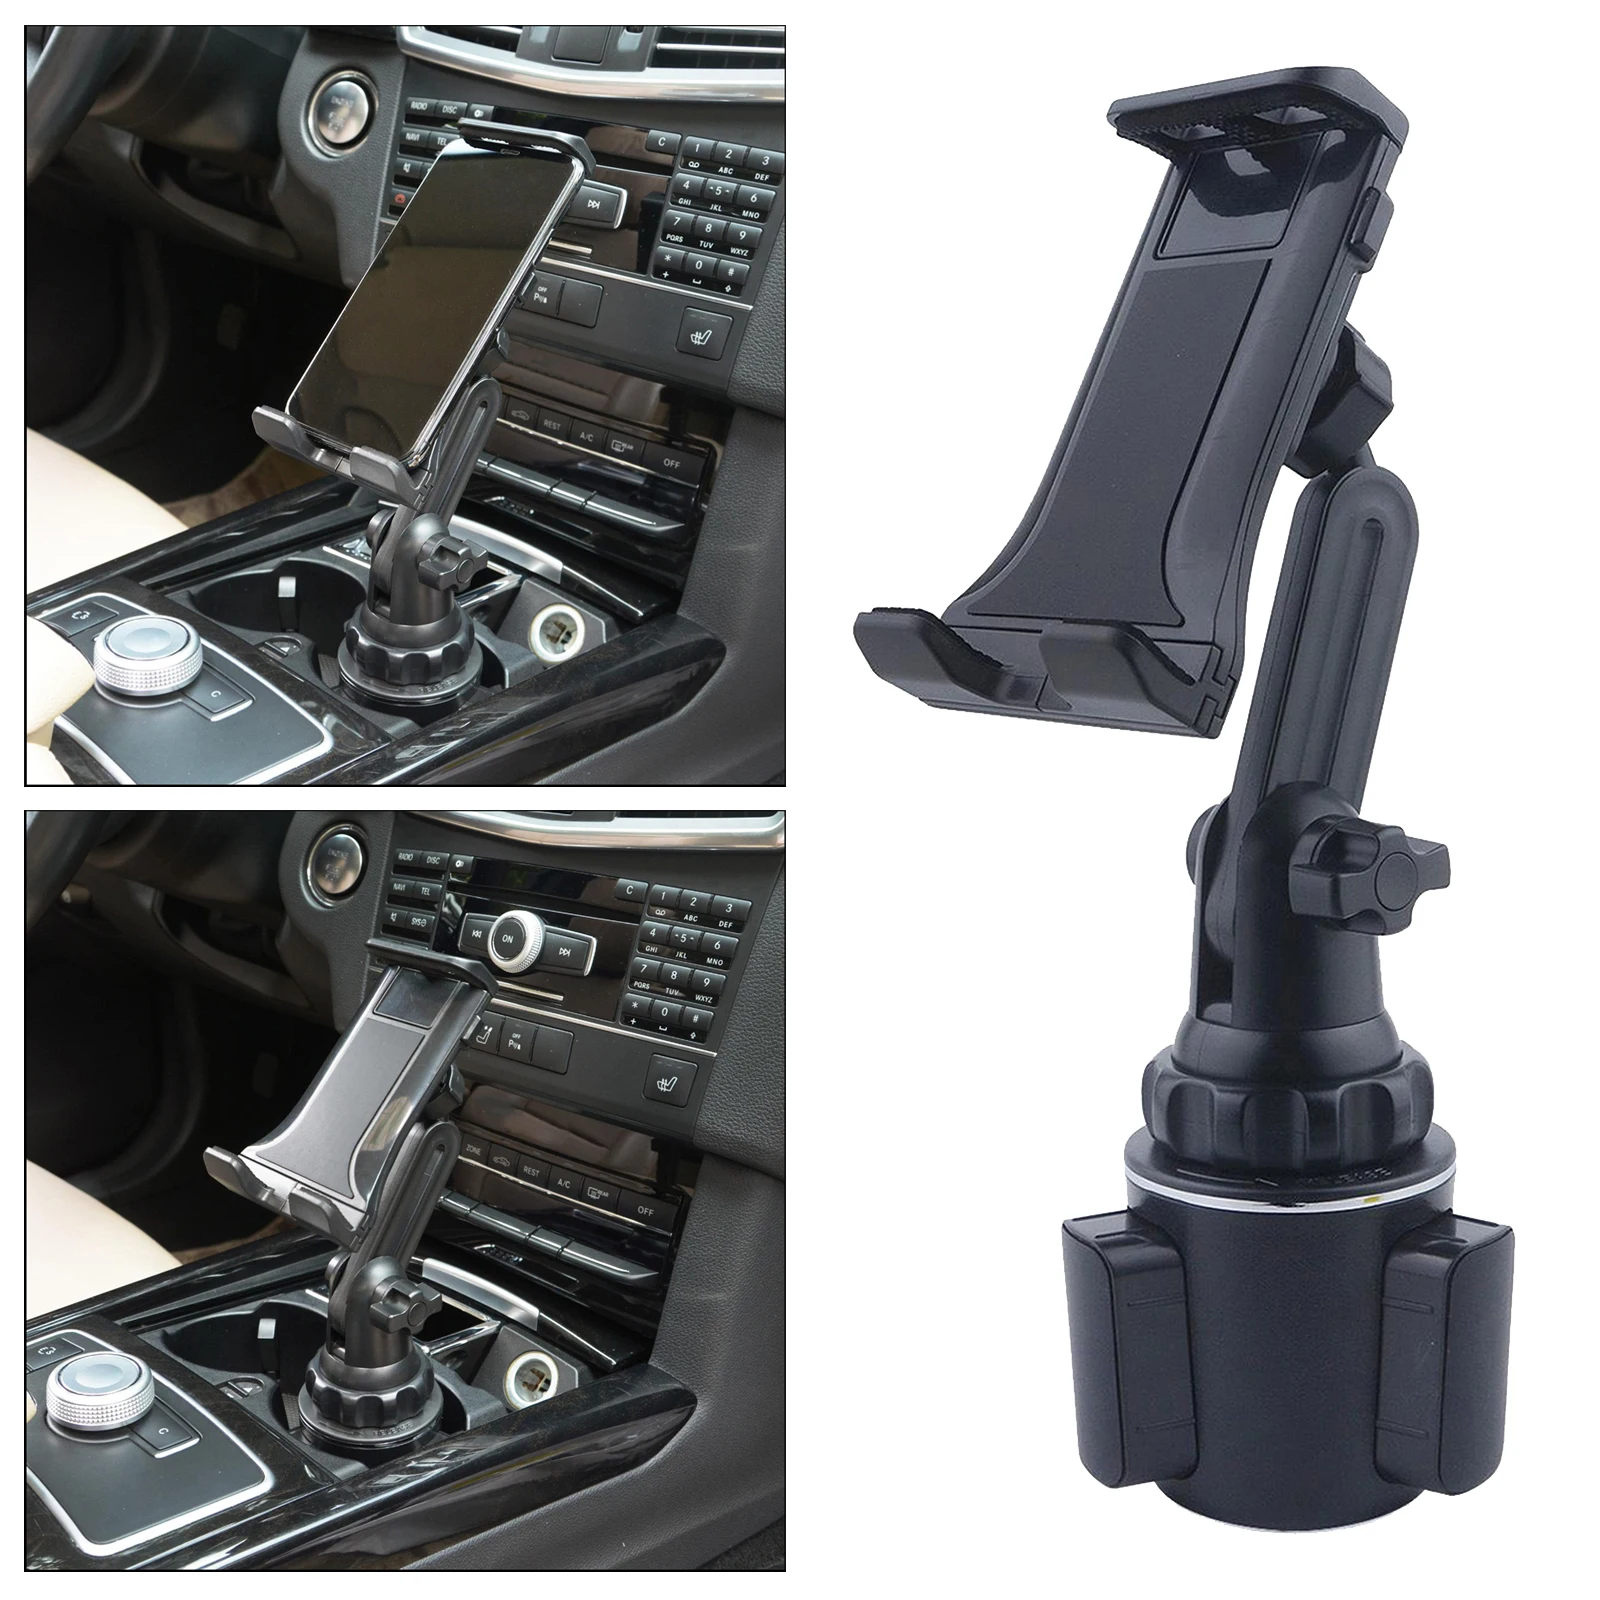 Upgraded Car Cup Holder Phone Mount Automobile Cup Holder Cell Phone Cradle